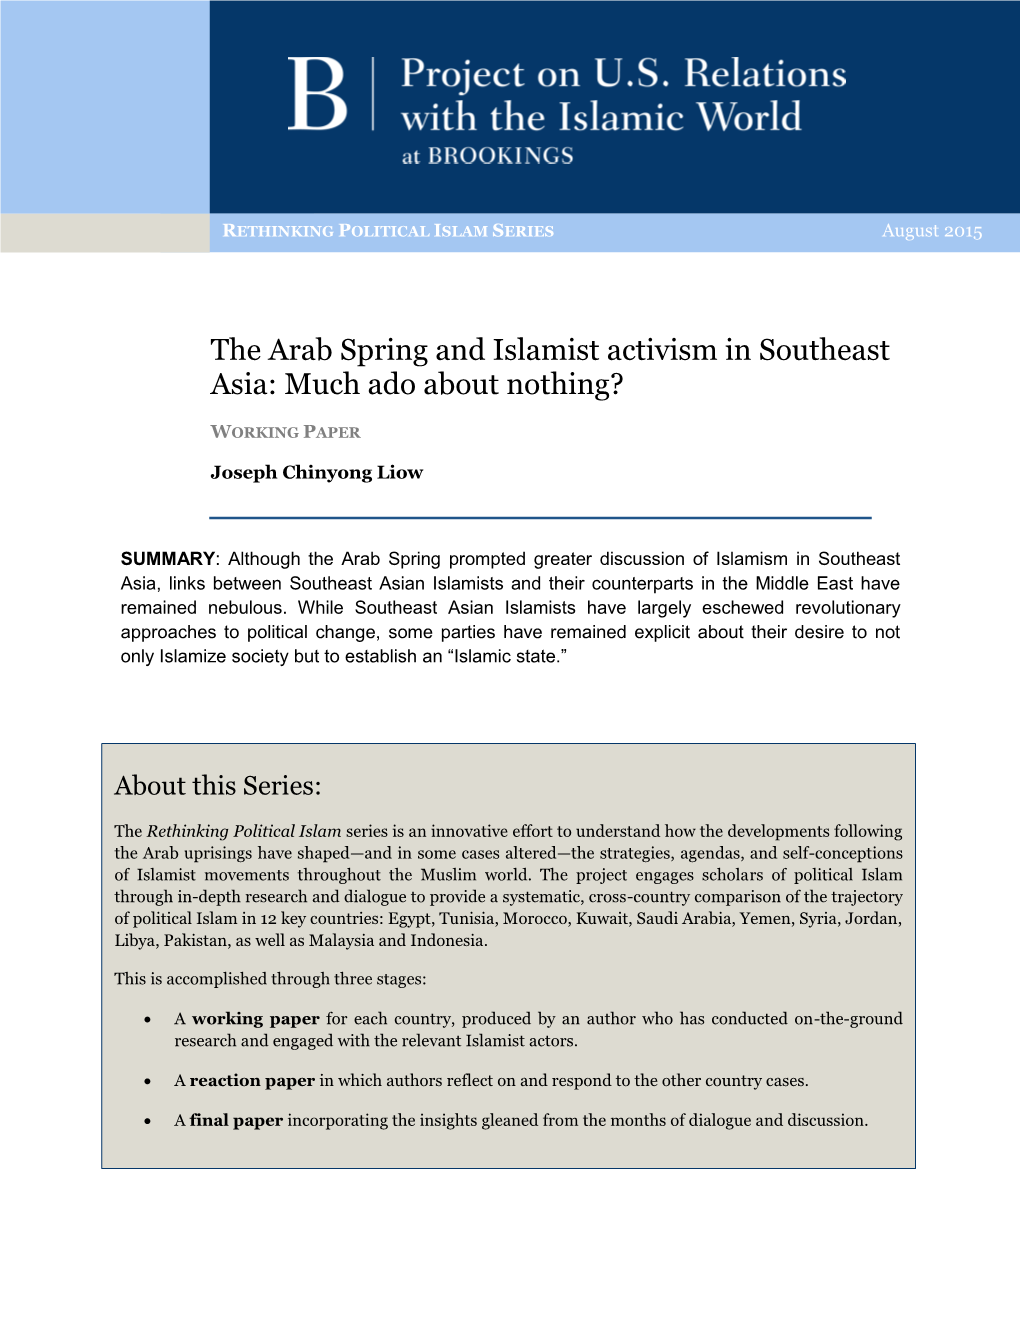 The Arab Spring and Islamist Activism in Southeast Asia: Much Ado About Nothing?